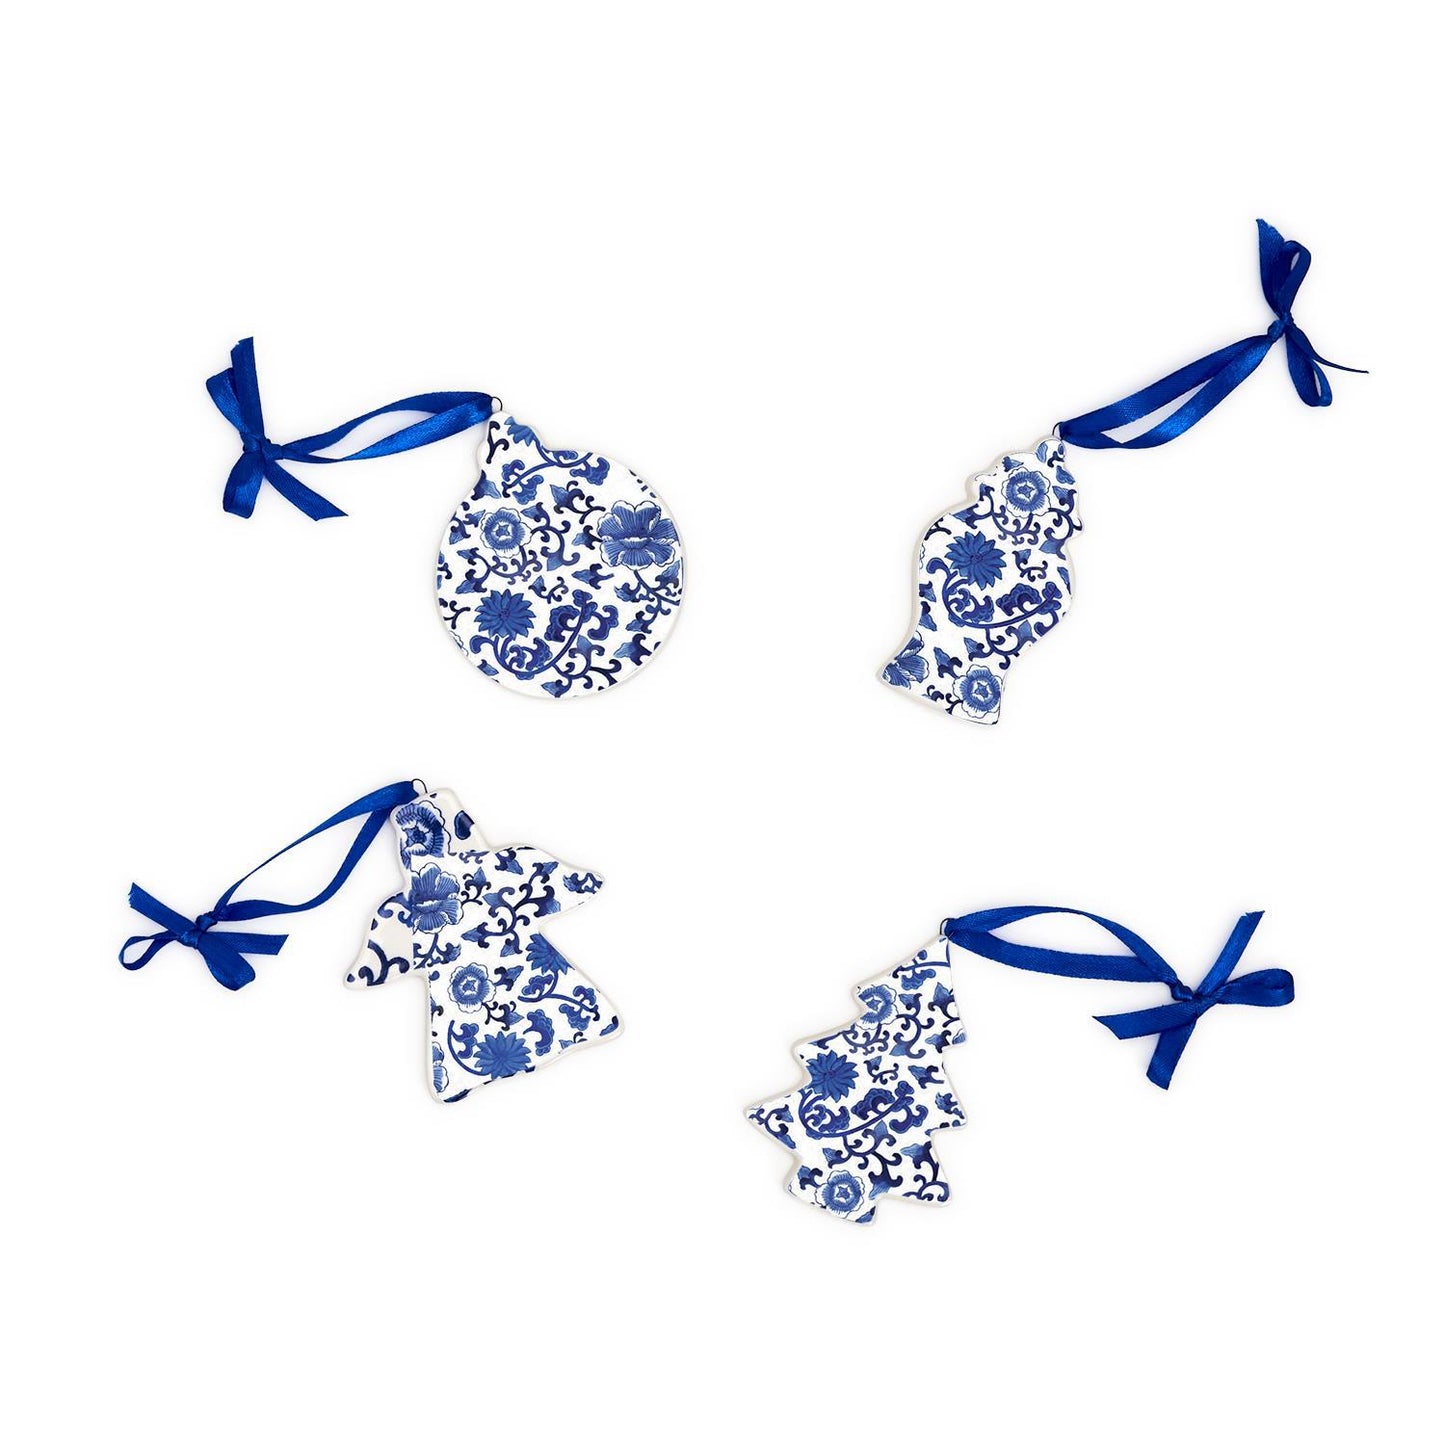 Chinoiserie Blue Floral Ornaments